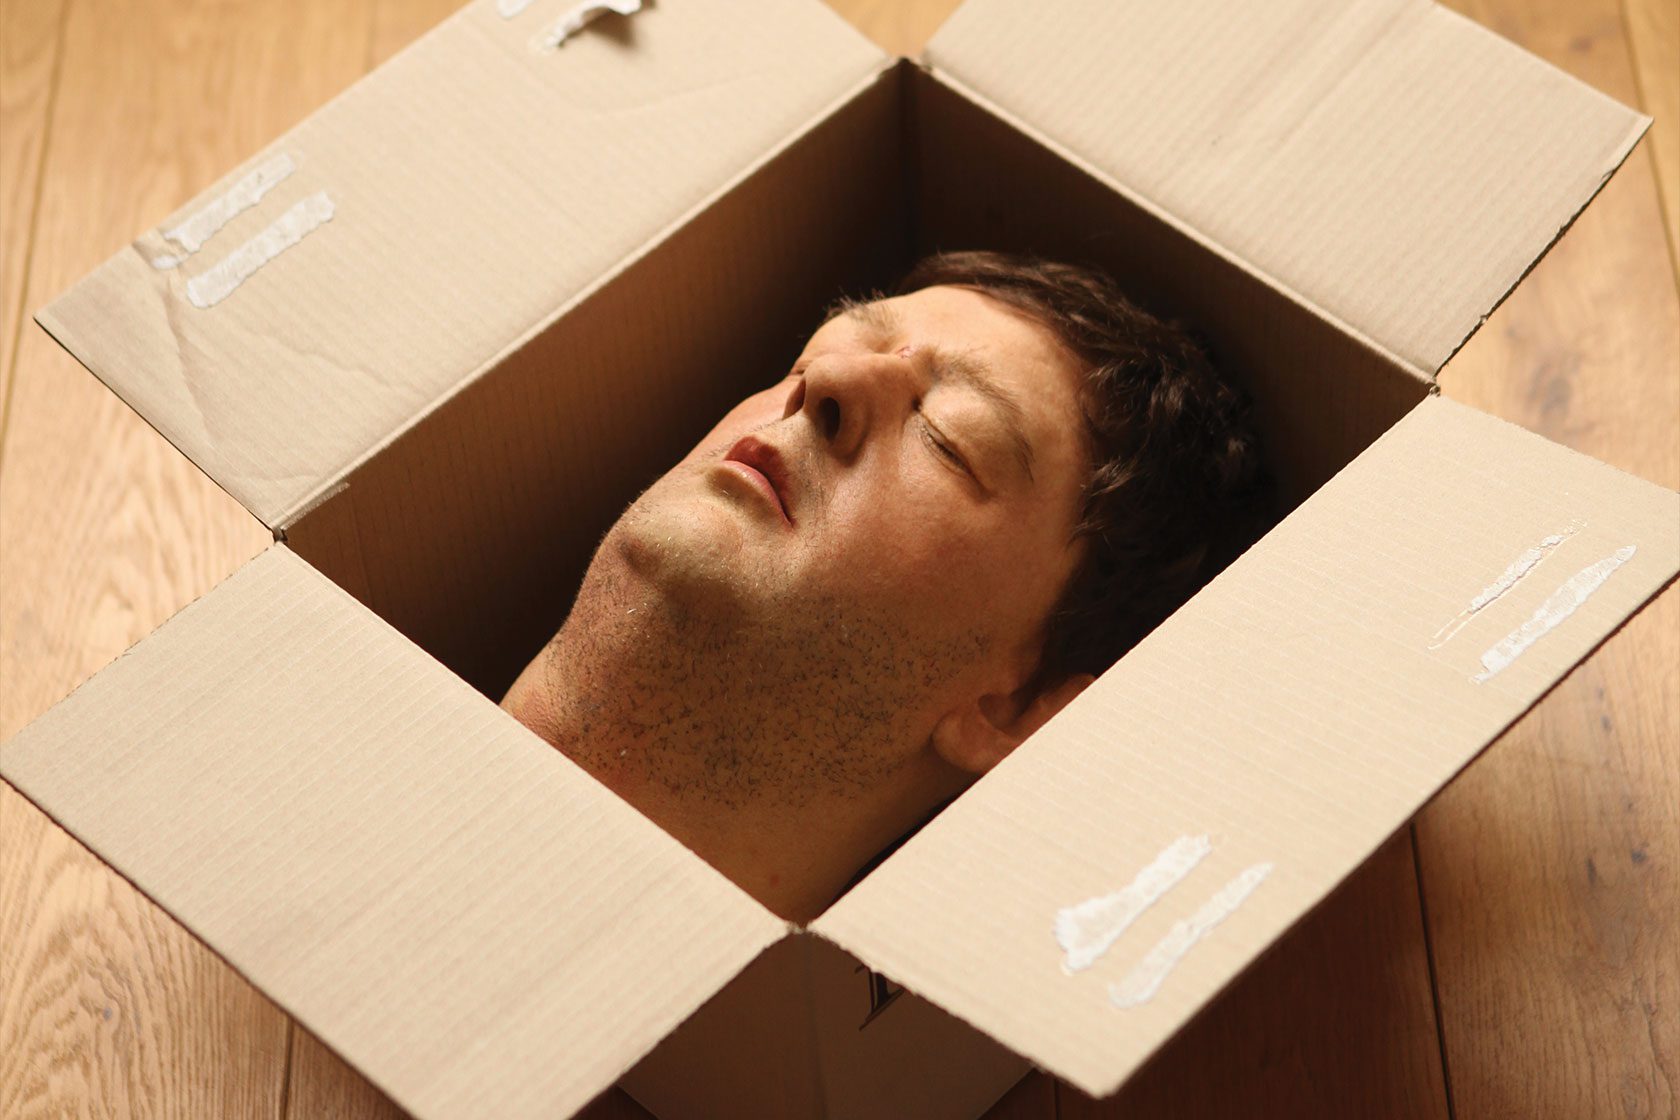 Becoming Johnny Vegas head in a box